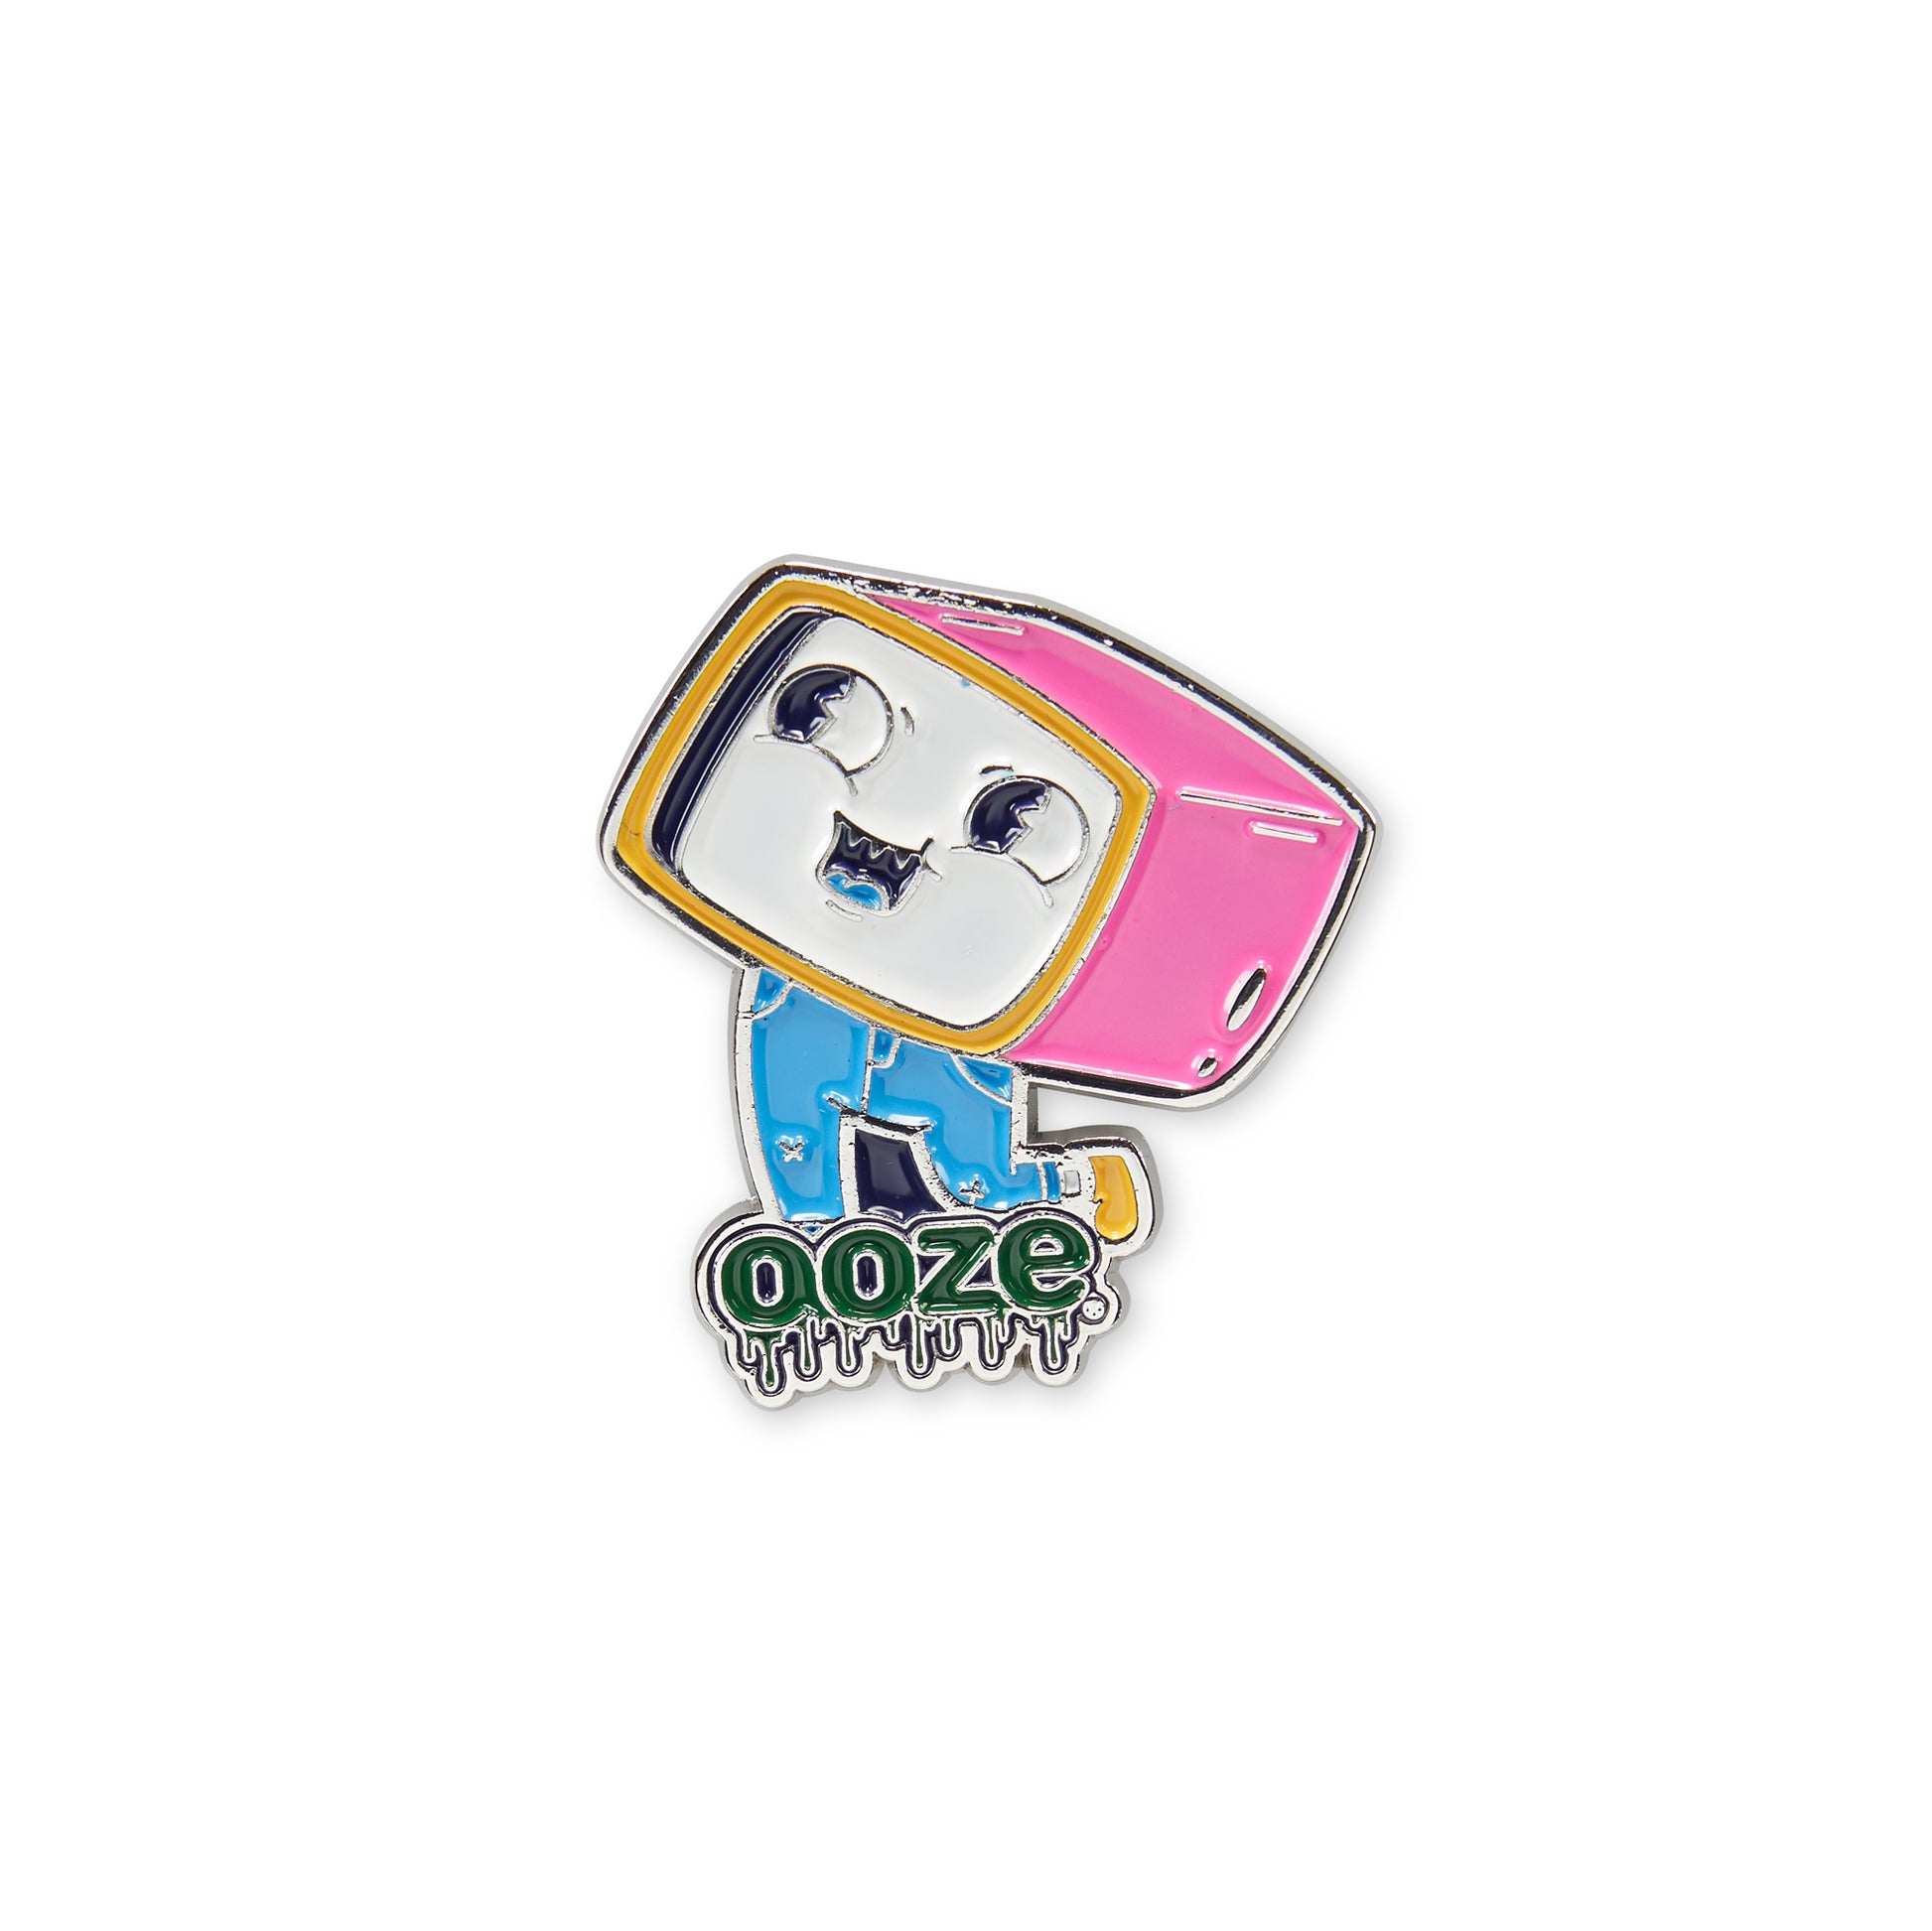 The TV Head Ooze enamel pin. It's a little dude with a pink TV for a head, white smiling face, and a pair of blue jeans above the Ooze logo